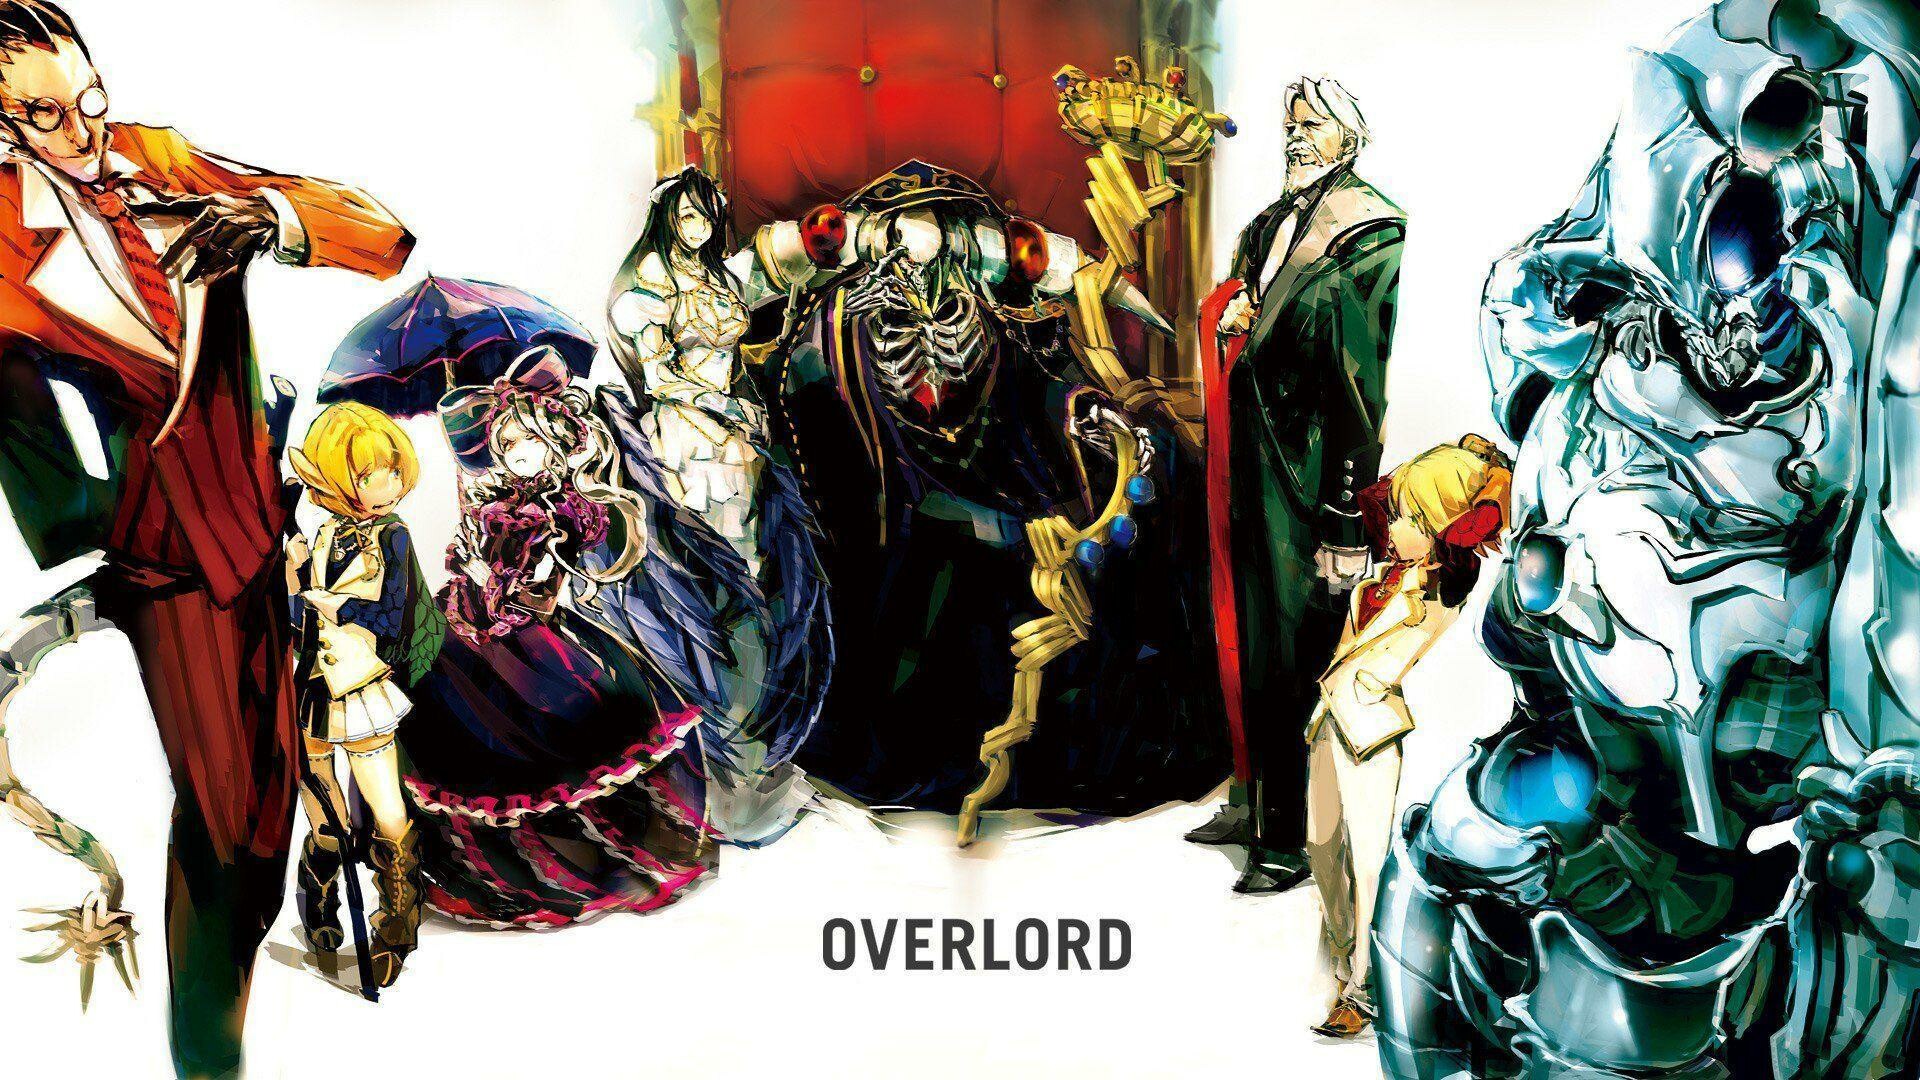 Overlord: The ending theme song of the third season is "Silent Solitude" by OxT. 1920x1080 Full HD Background.